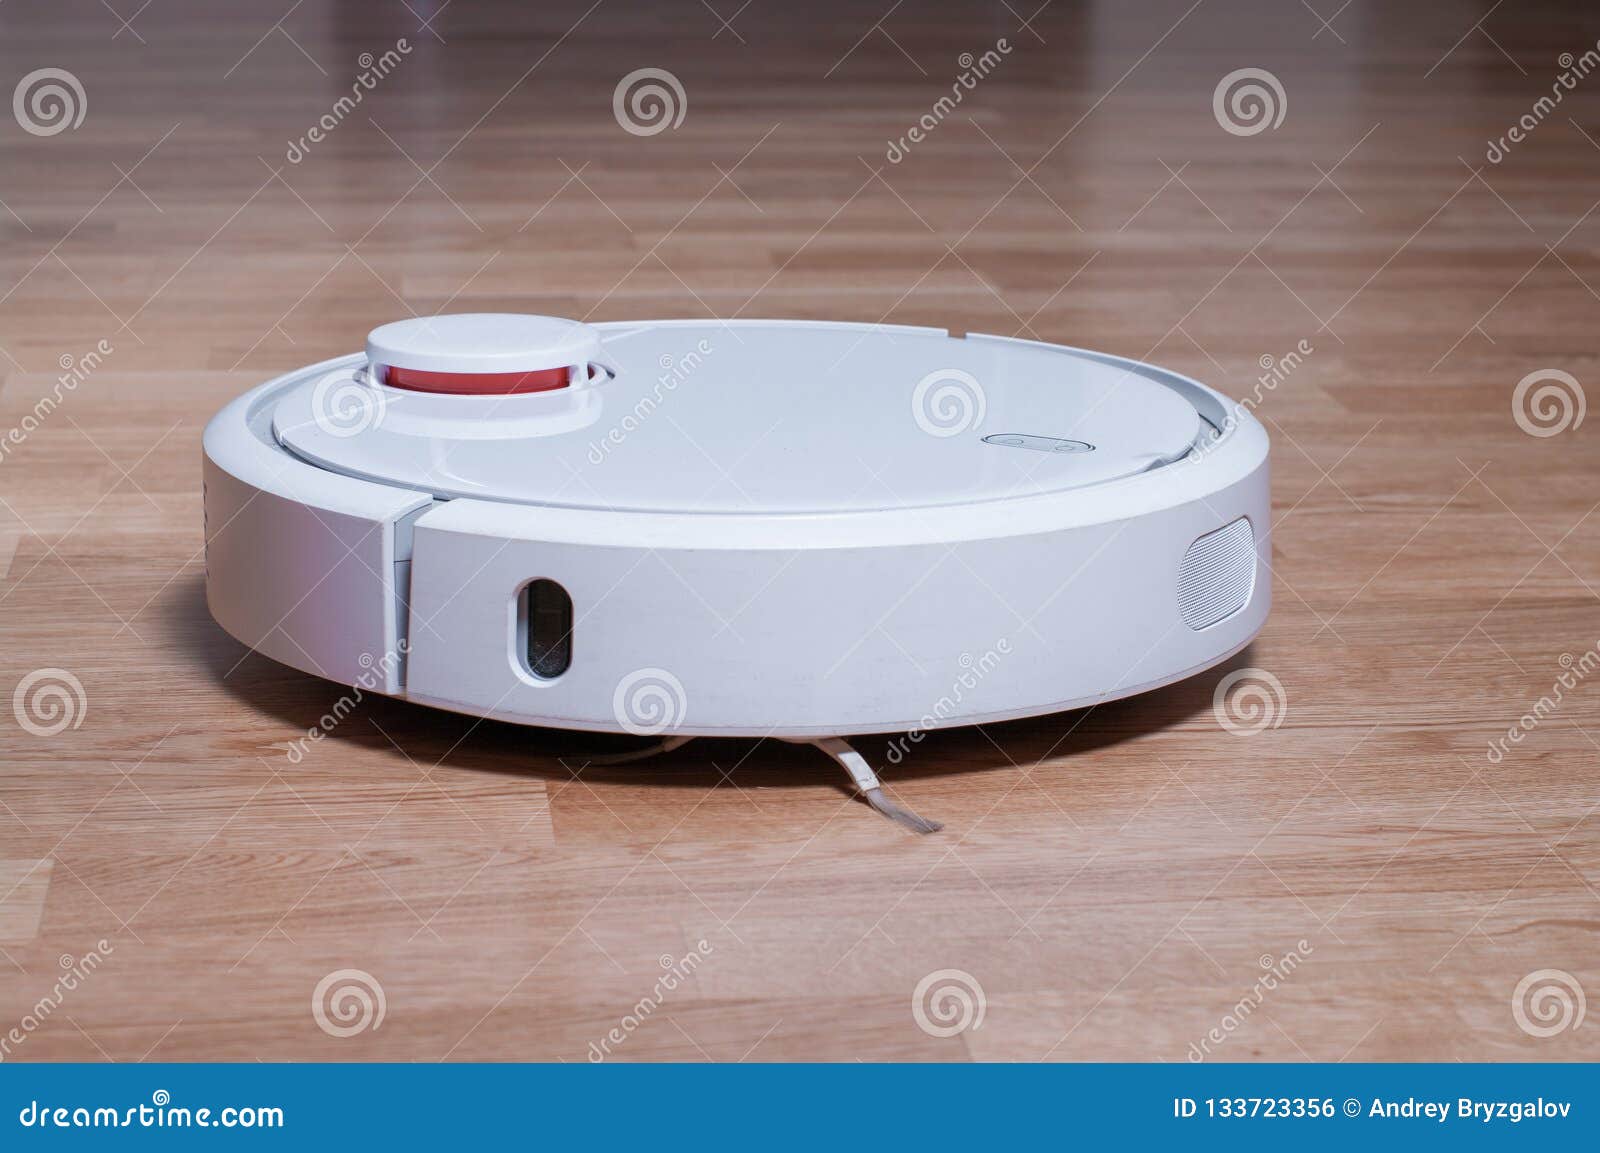 White Robot Vacuum Cleaner On Parquet Floor Cleaning Dust In The